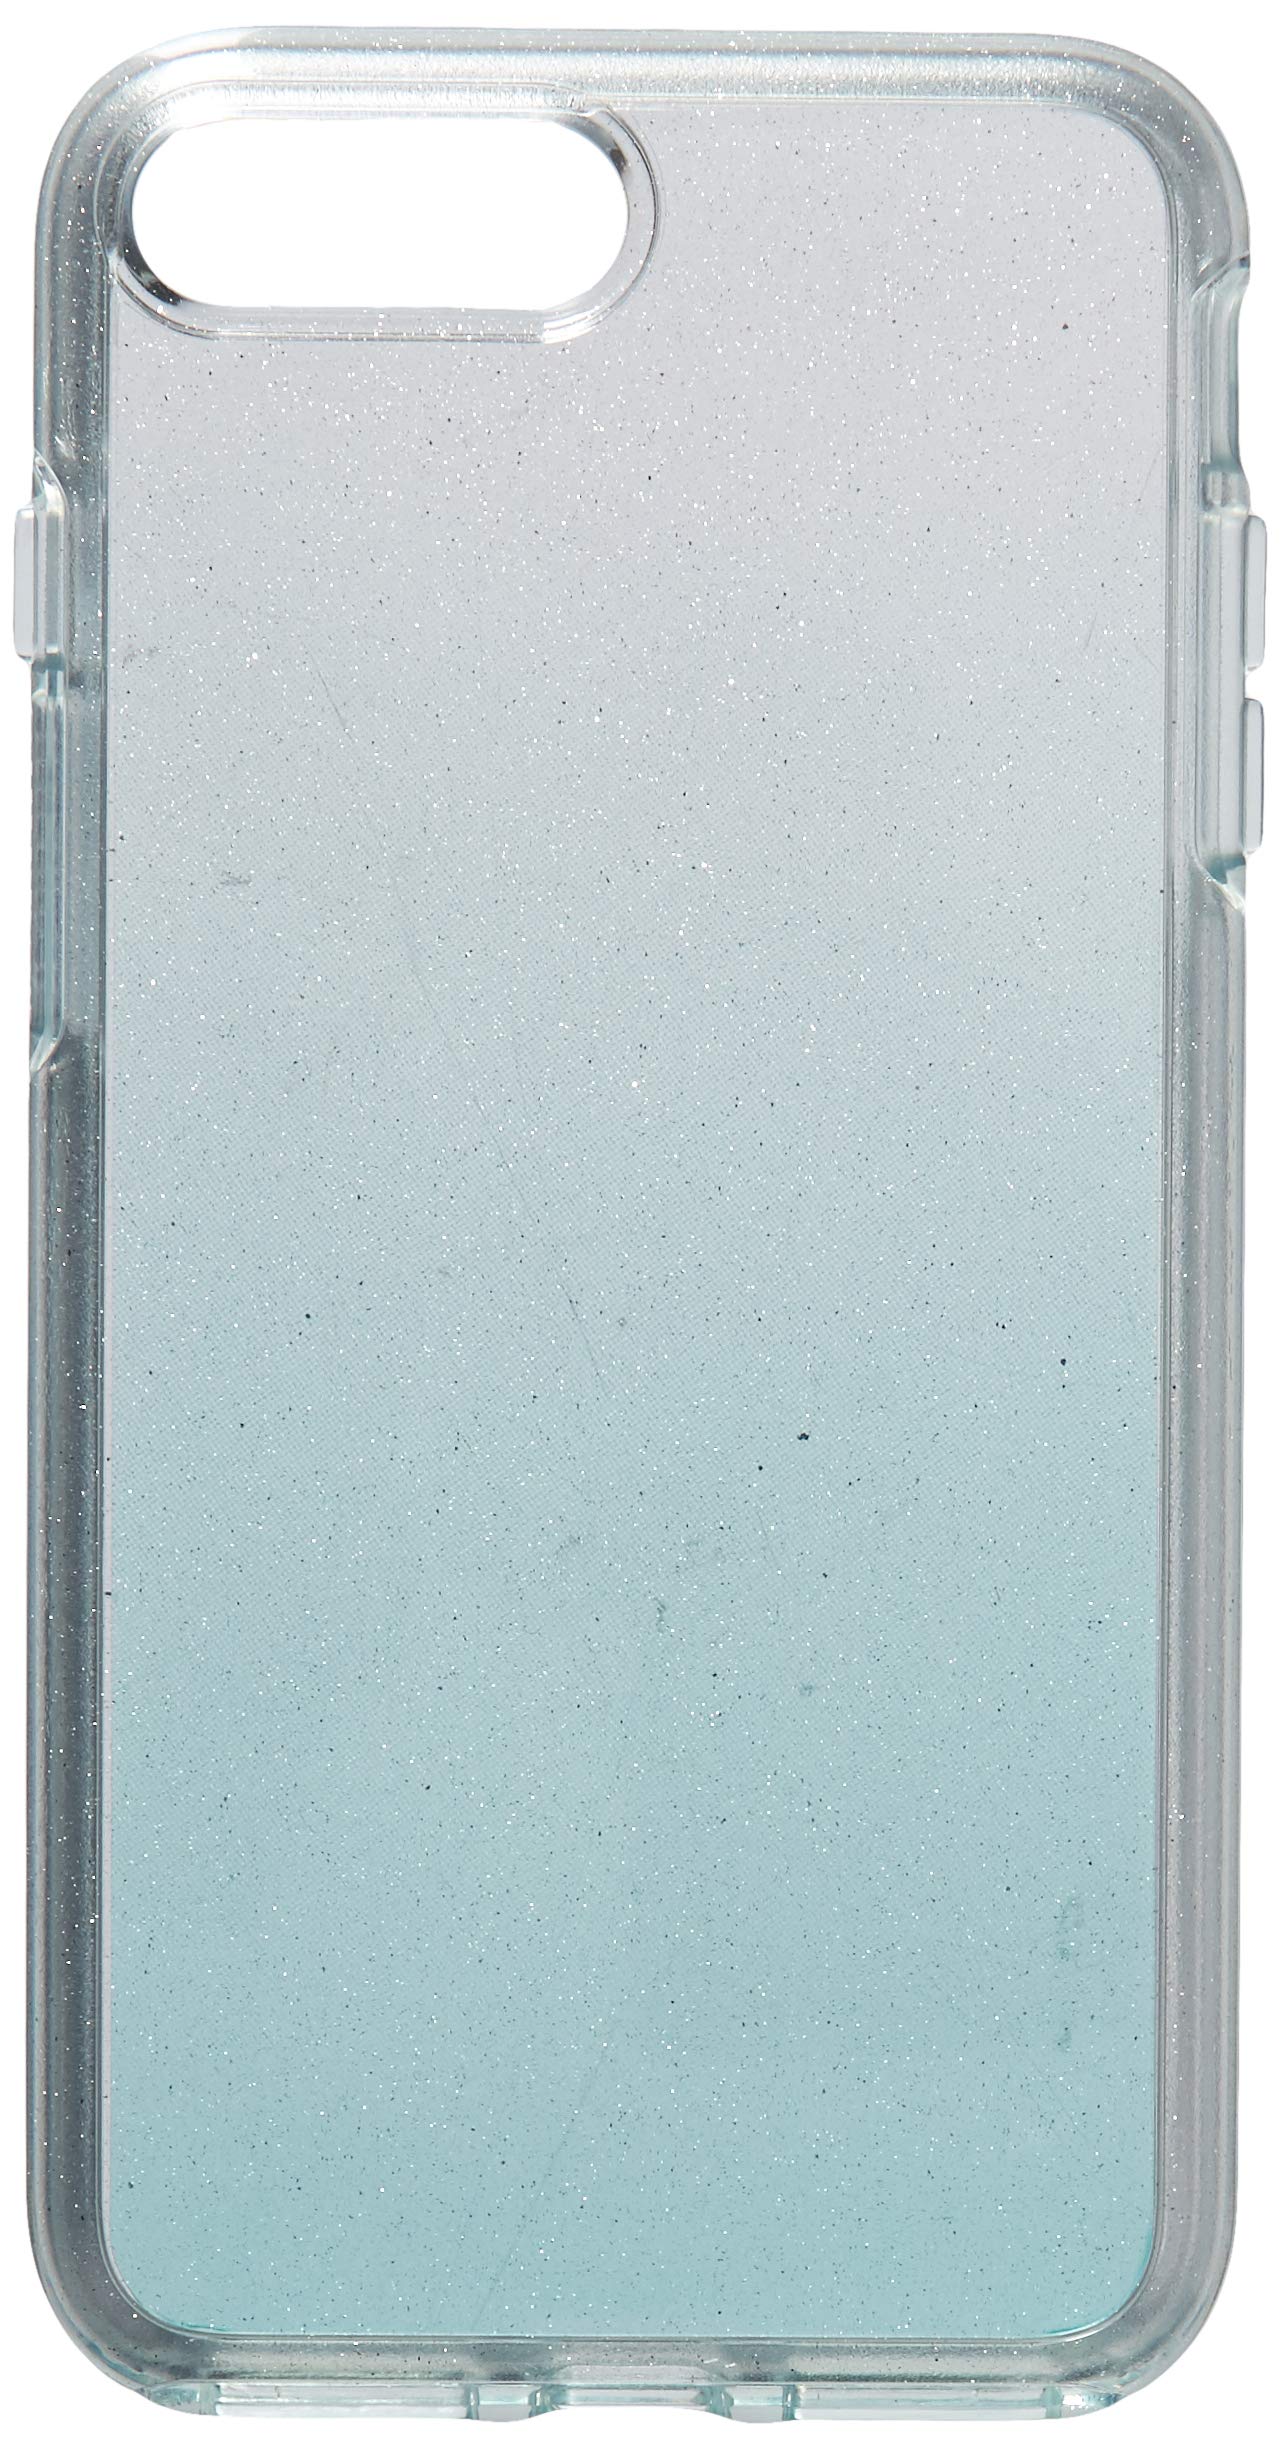 OtterBox SYMMETRY CLEAR SERIES Case for iPhone 8 Plus & iPhone 7 Plus (ONLY) - Retail Packaging - ALOHA OMBRE (SILVER FLAKE/CLEAR/ALOHA OMBRE)